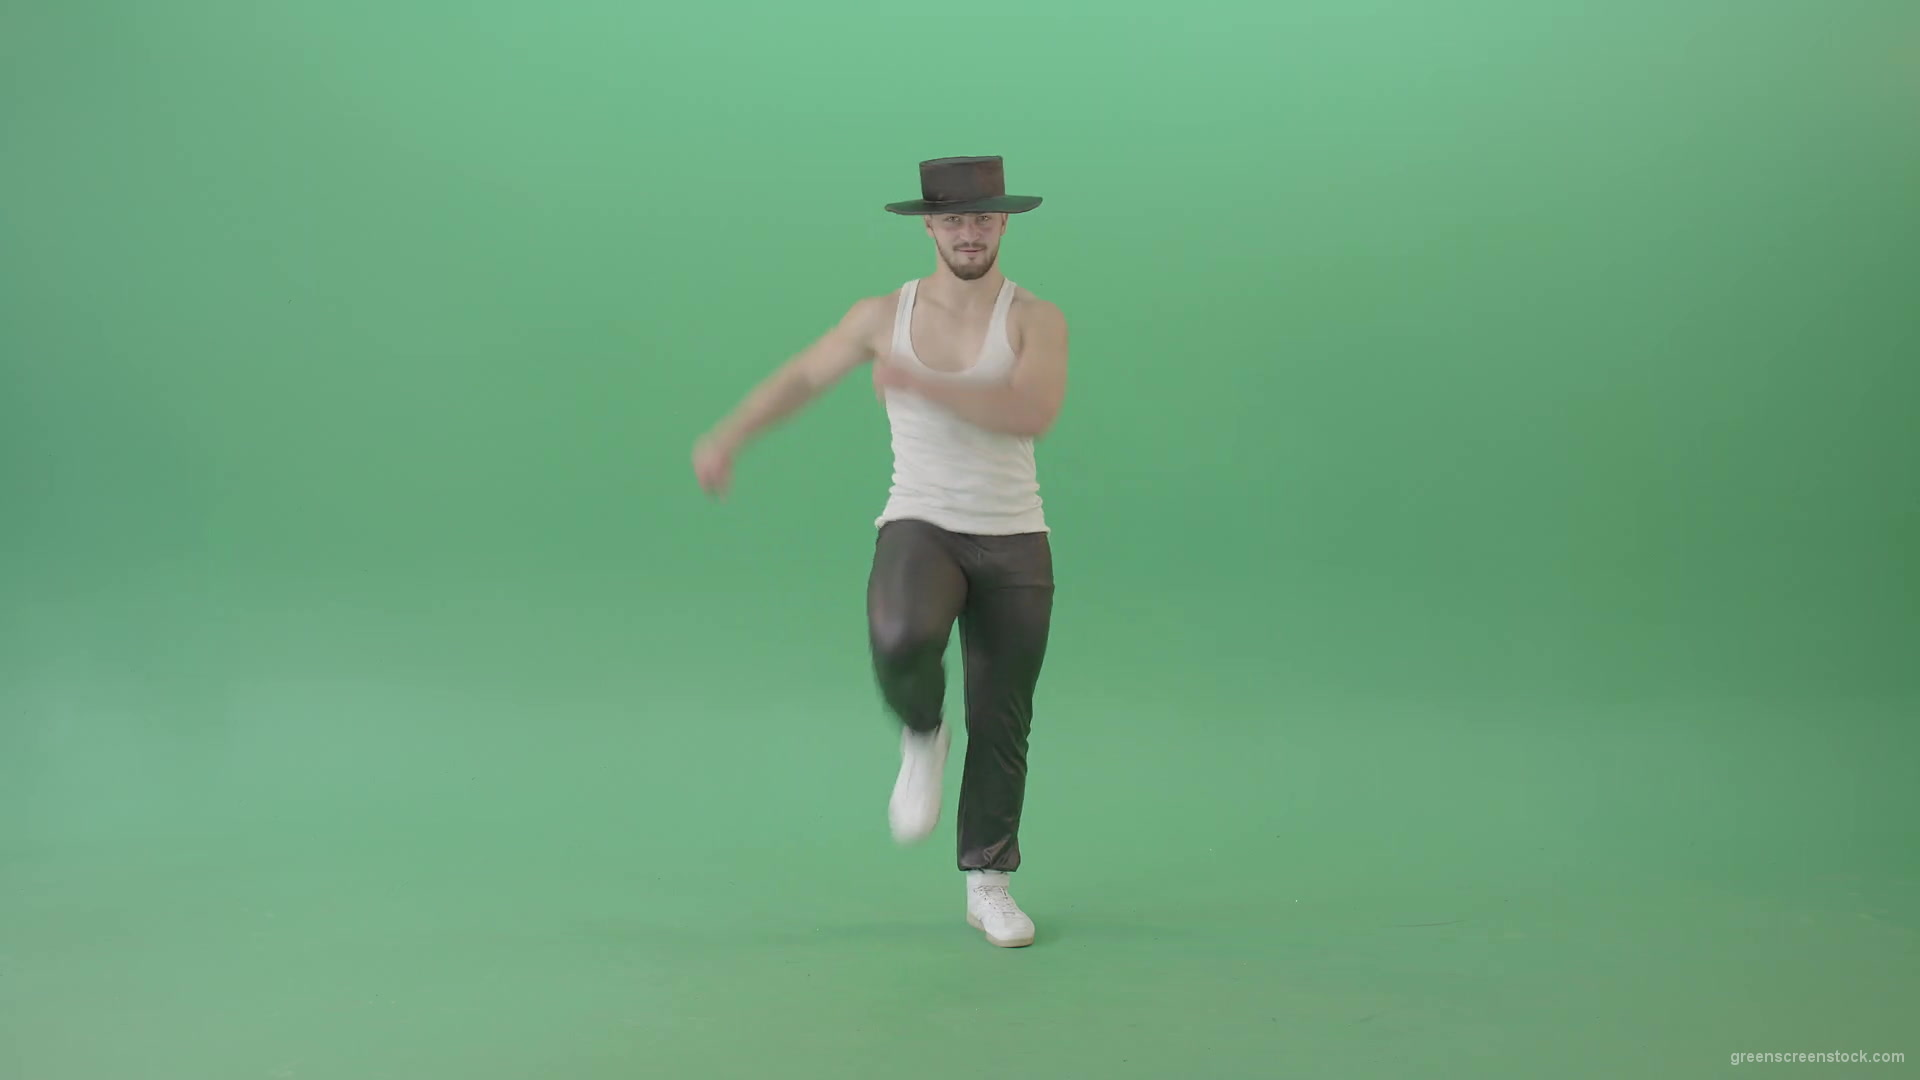 Funny-Man-marching-in-beat-isolated-on-Green-Screen-Chroma-Key-4K-Video-Footage-1920_002 Green Screen Stock